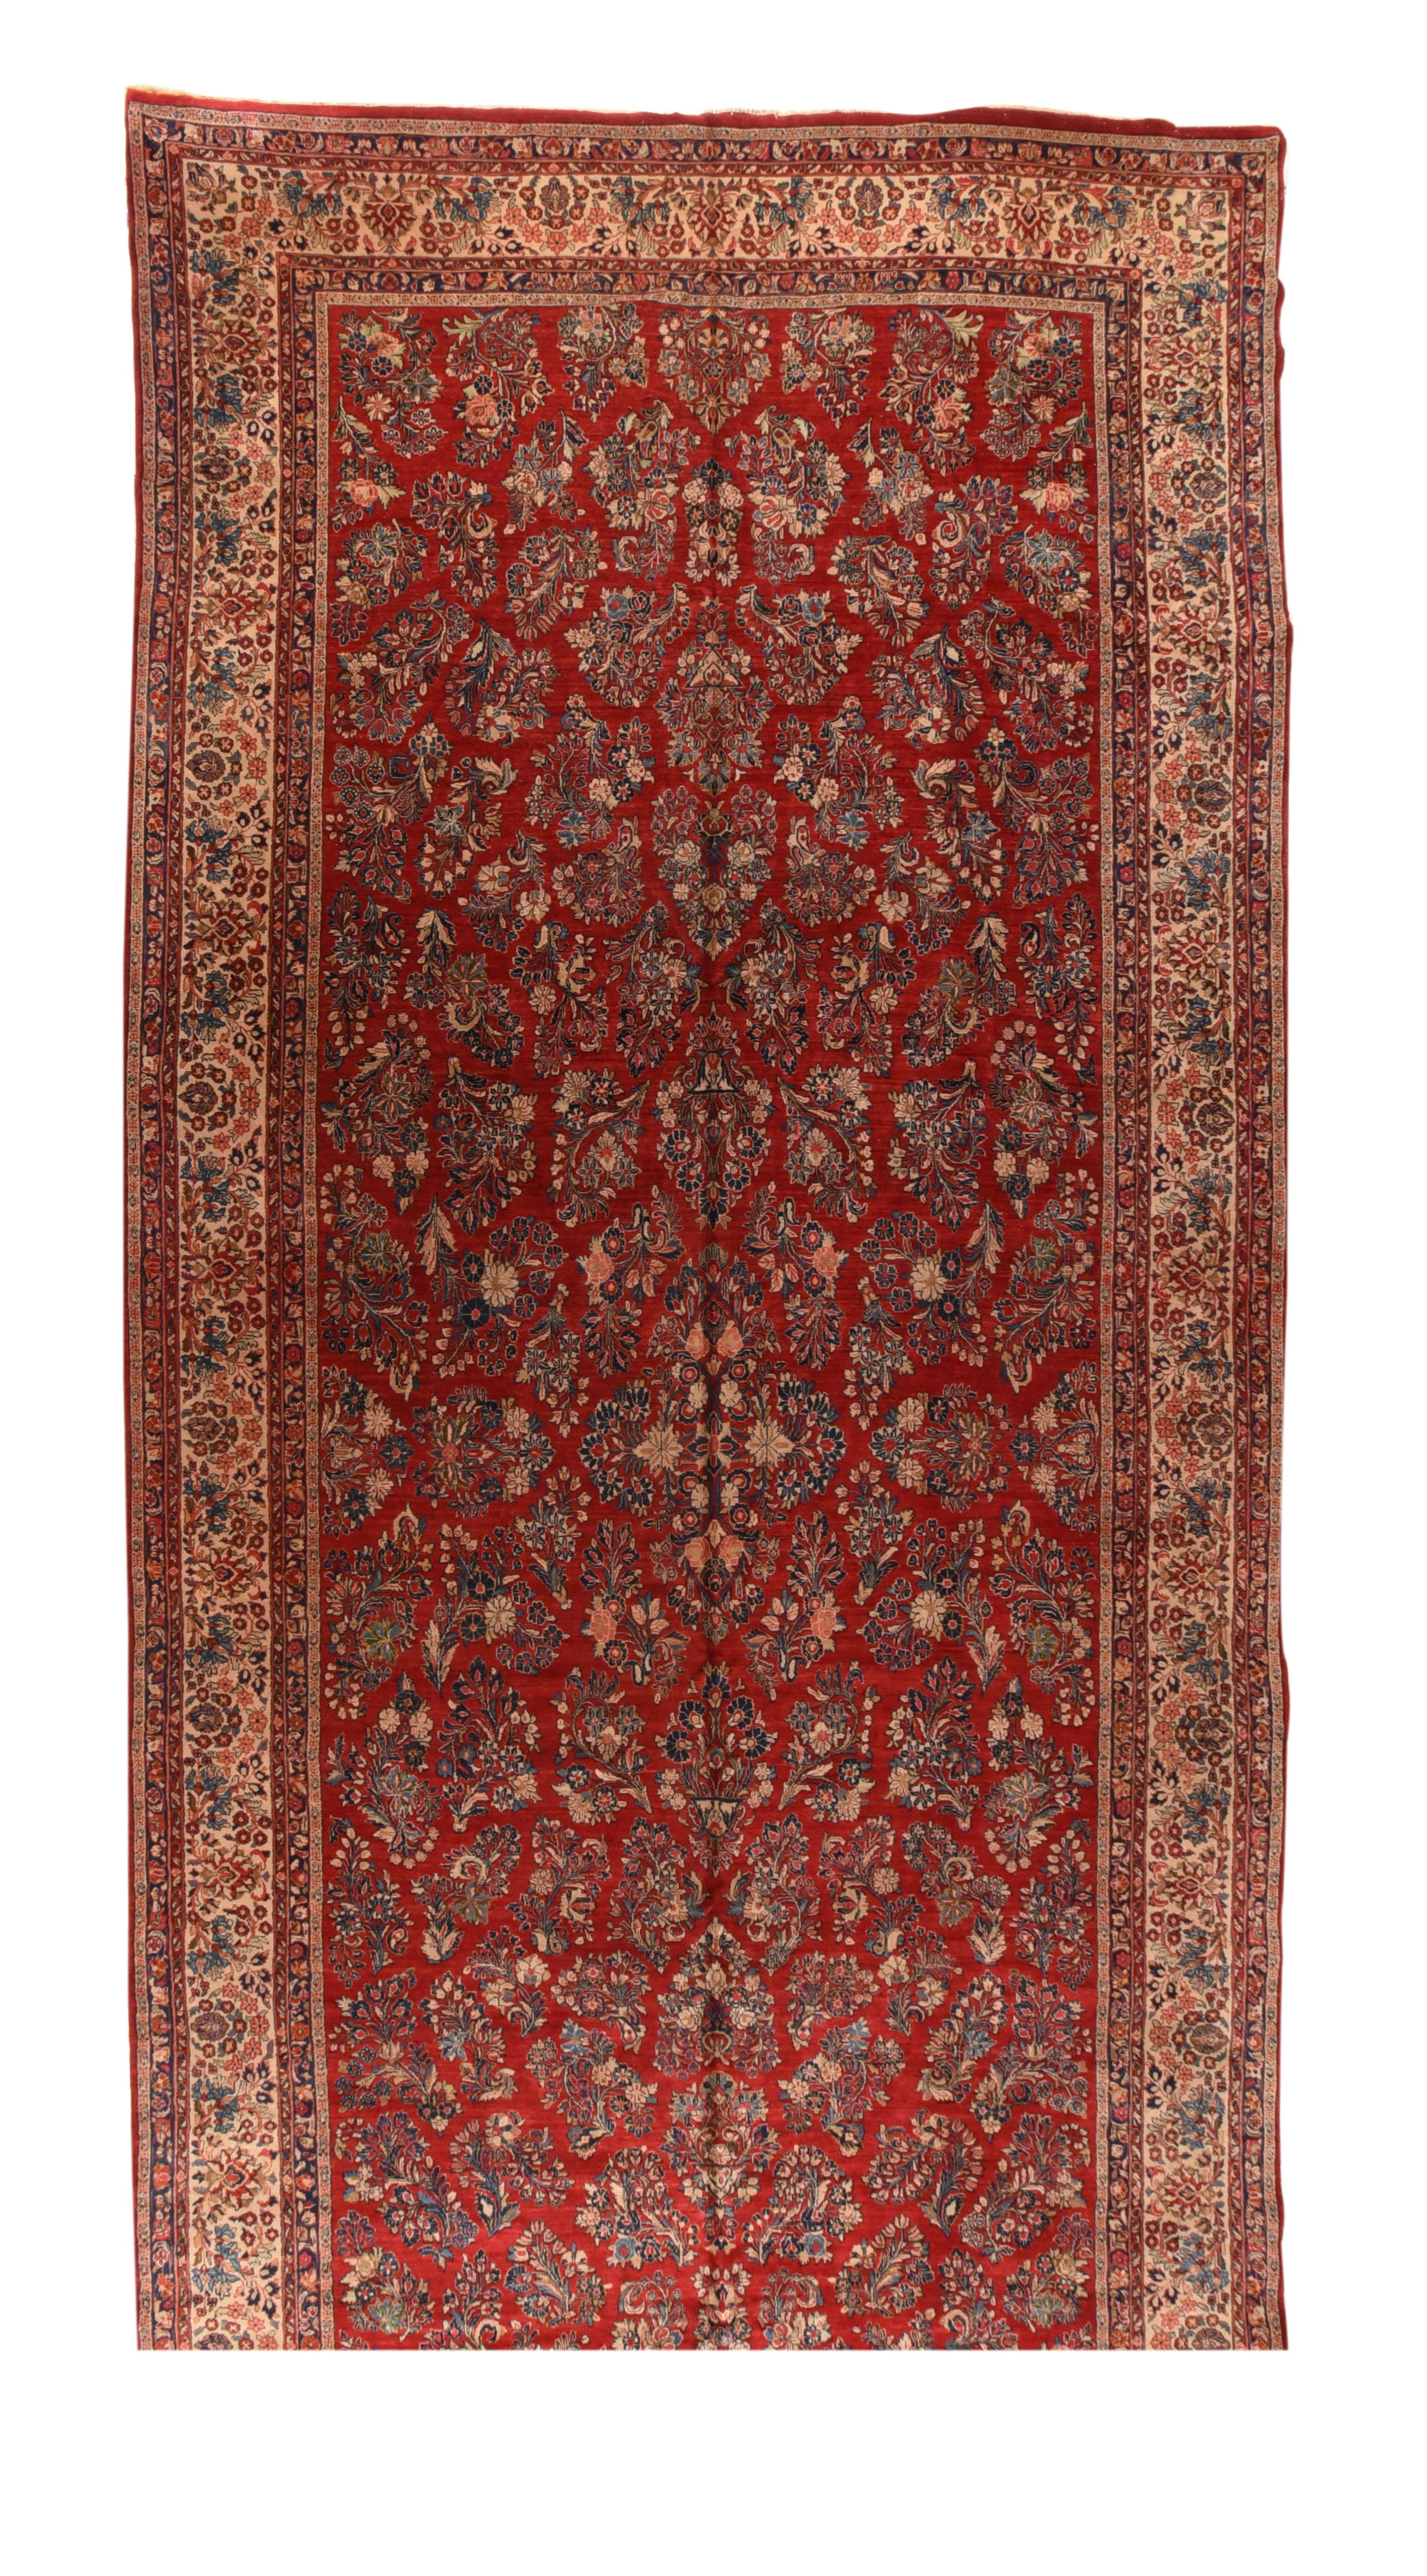 Antique Persian Sarouk Area Rug In Good Condition For Sale In New York, NY